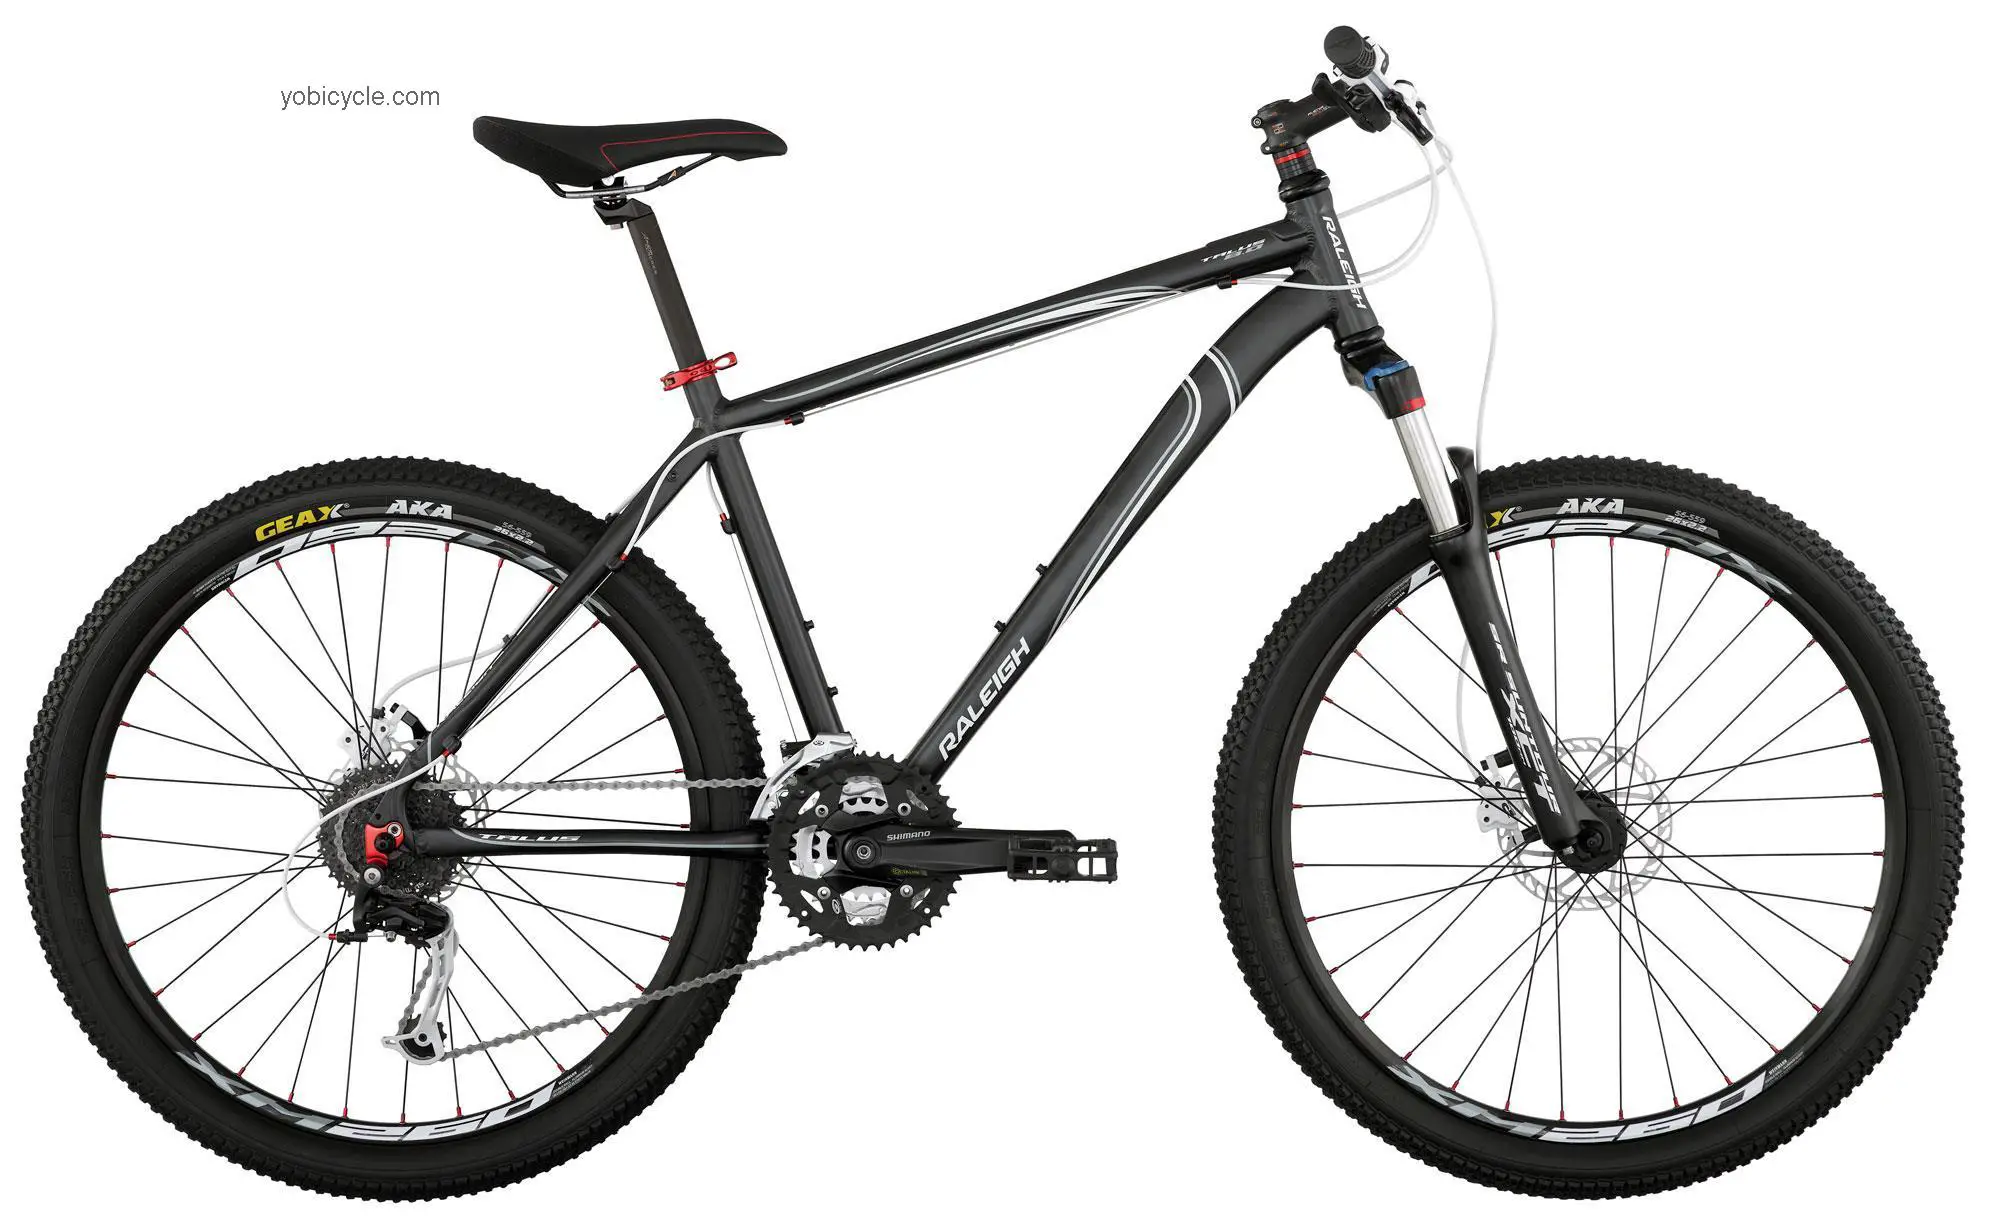 Raleigh Talus 8.0 2012 comparison online with competitors